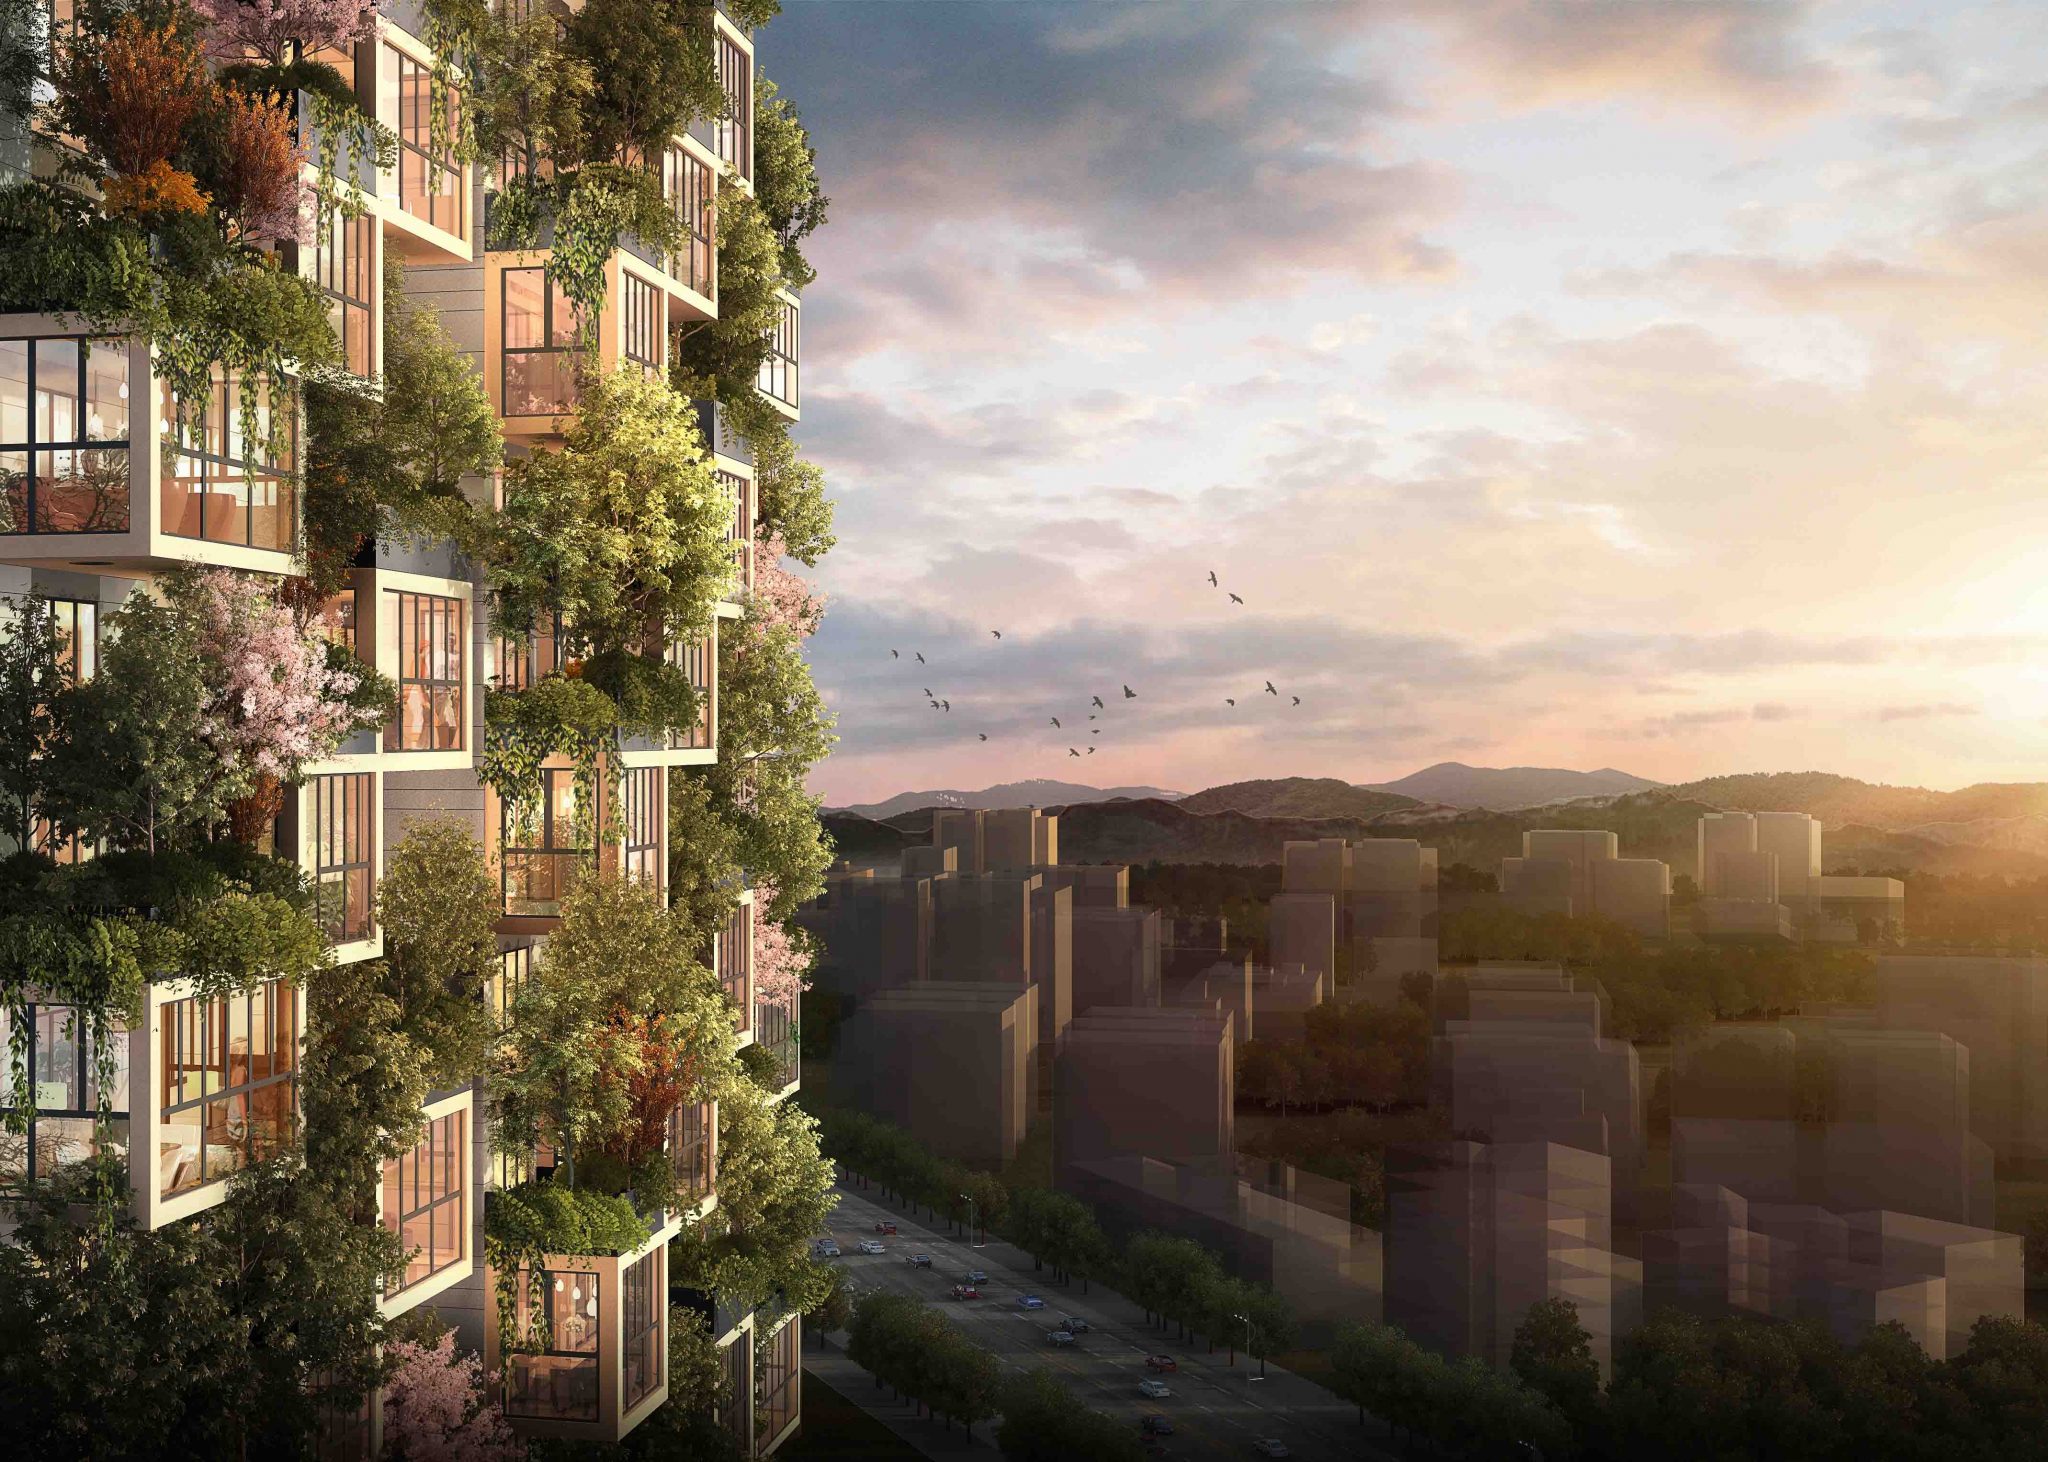 Located in the city of Huanggang in Hubei province, the Easyhome Huanggang Vertical Forest City Complex covers an area of 4.54 hectares, and has been designed to create a new green complex capable of integrating buildings for residences, hotels and large commercial spaces.